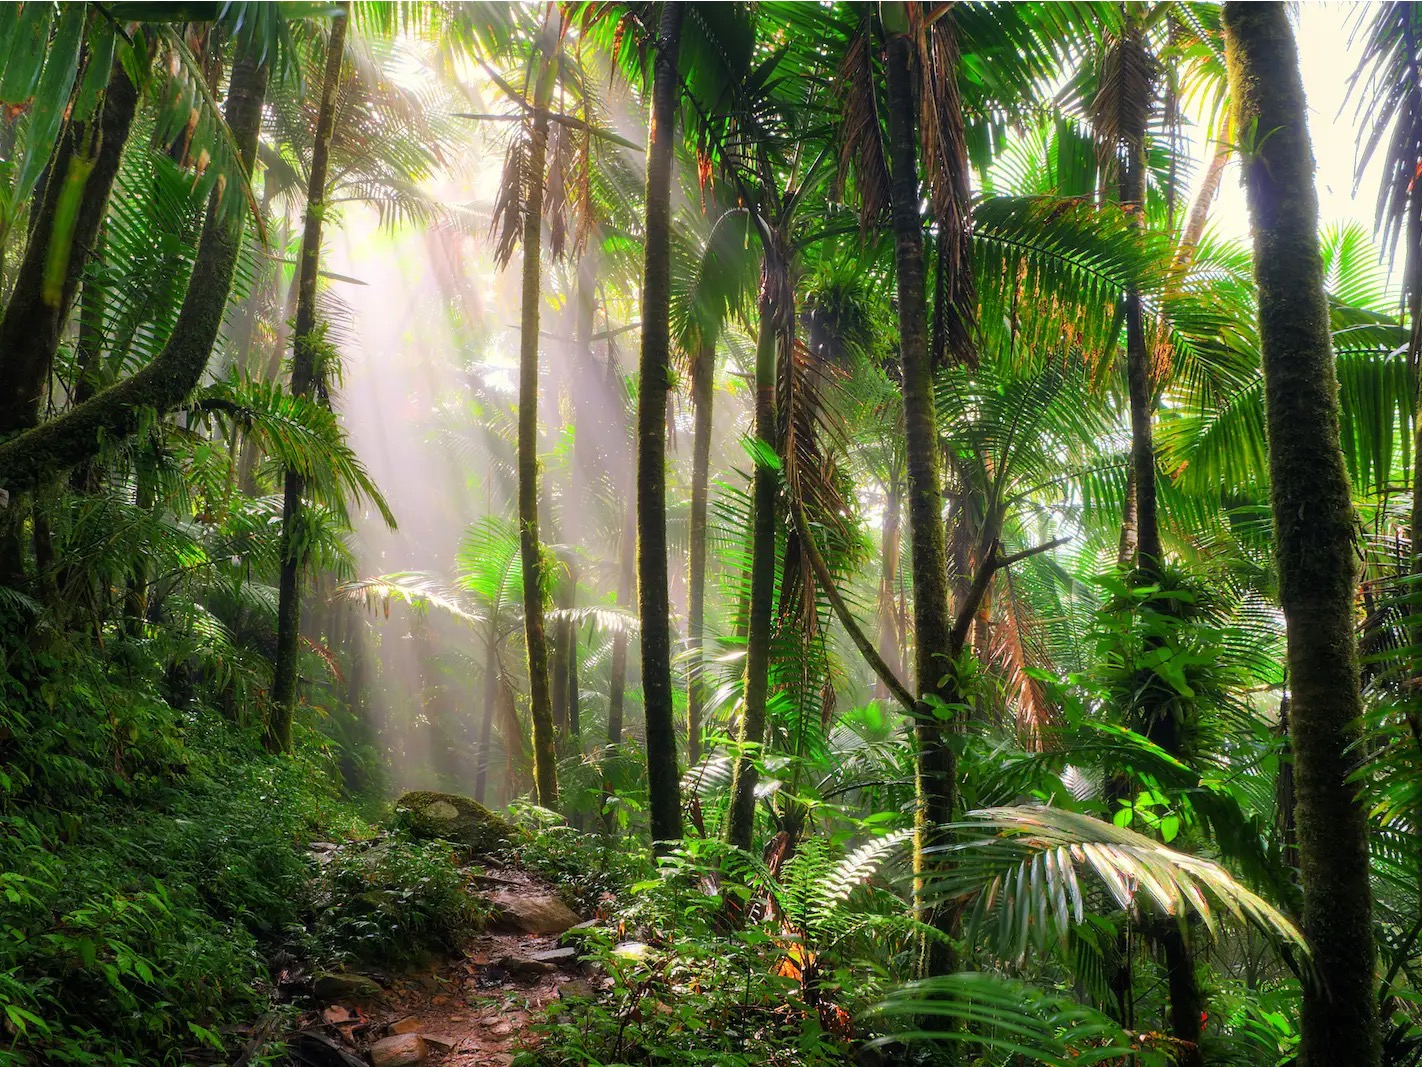 Tropical rainforest, El Yunque National Forest in Puerto Rico